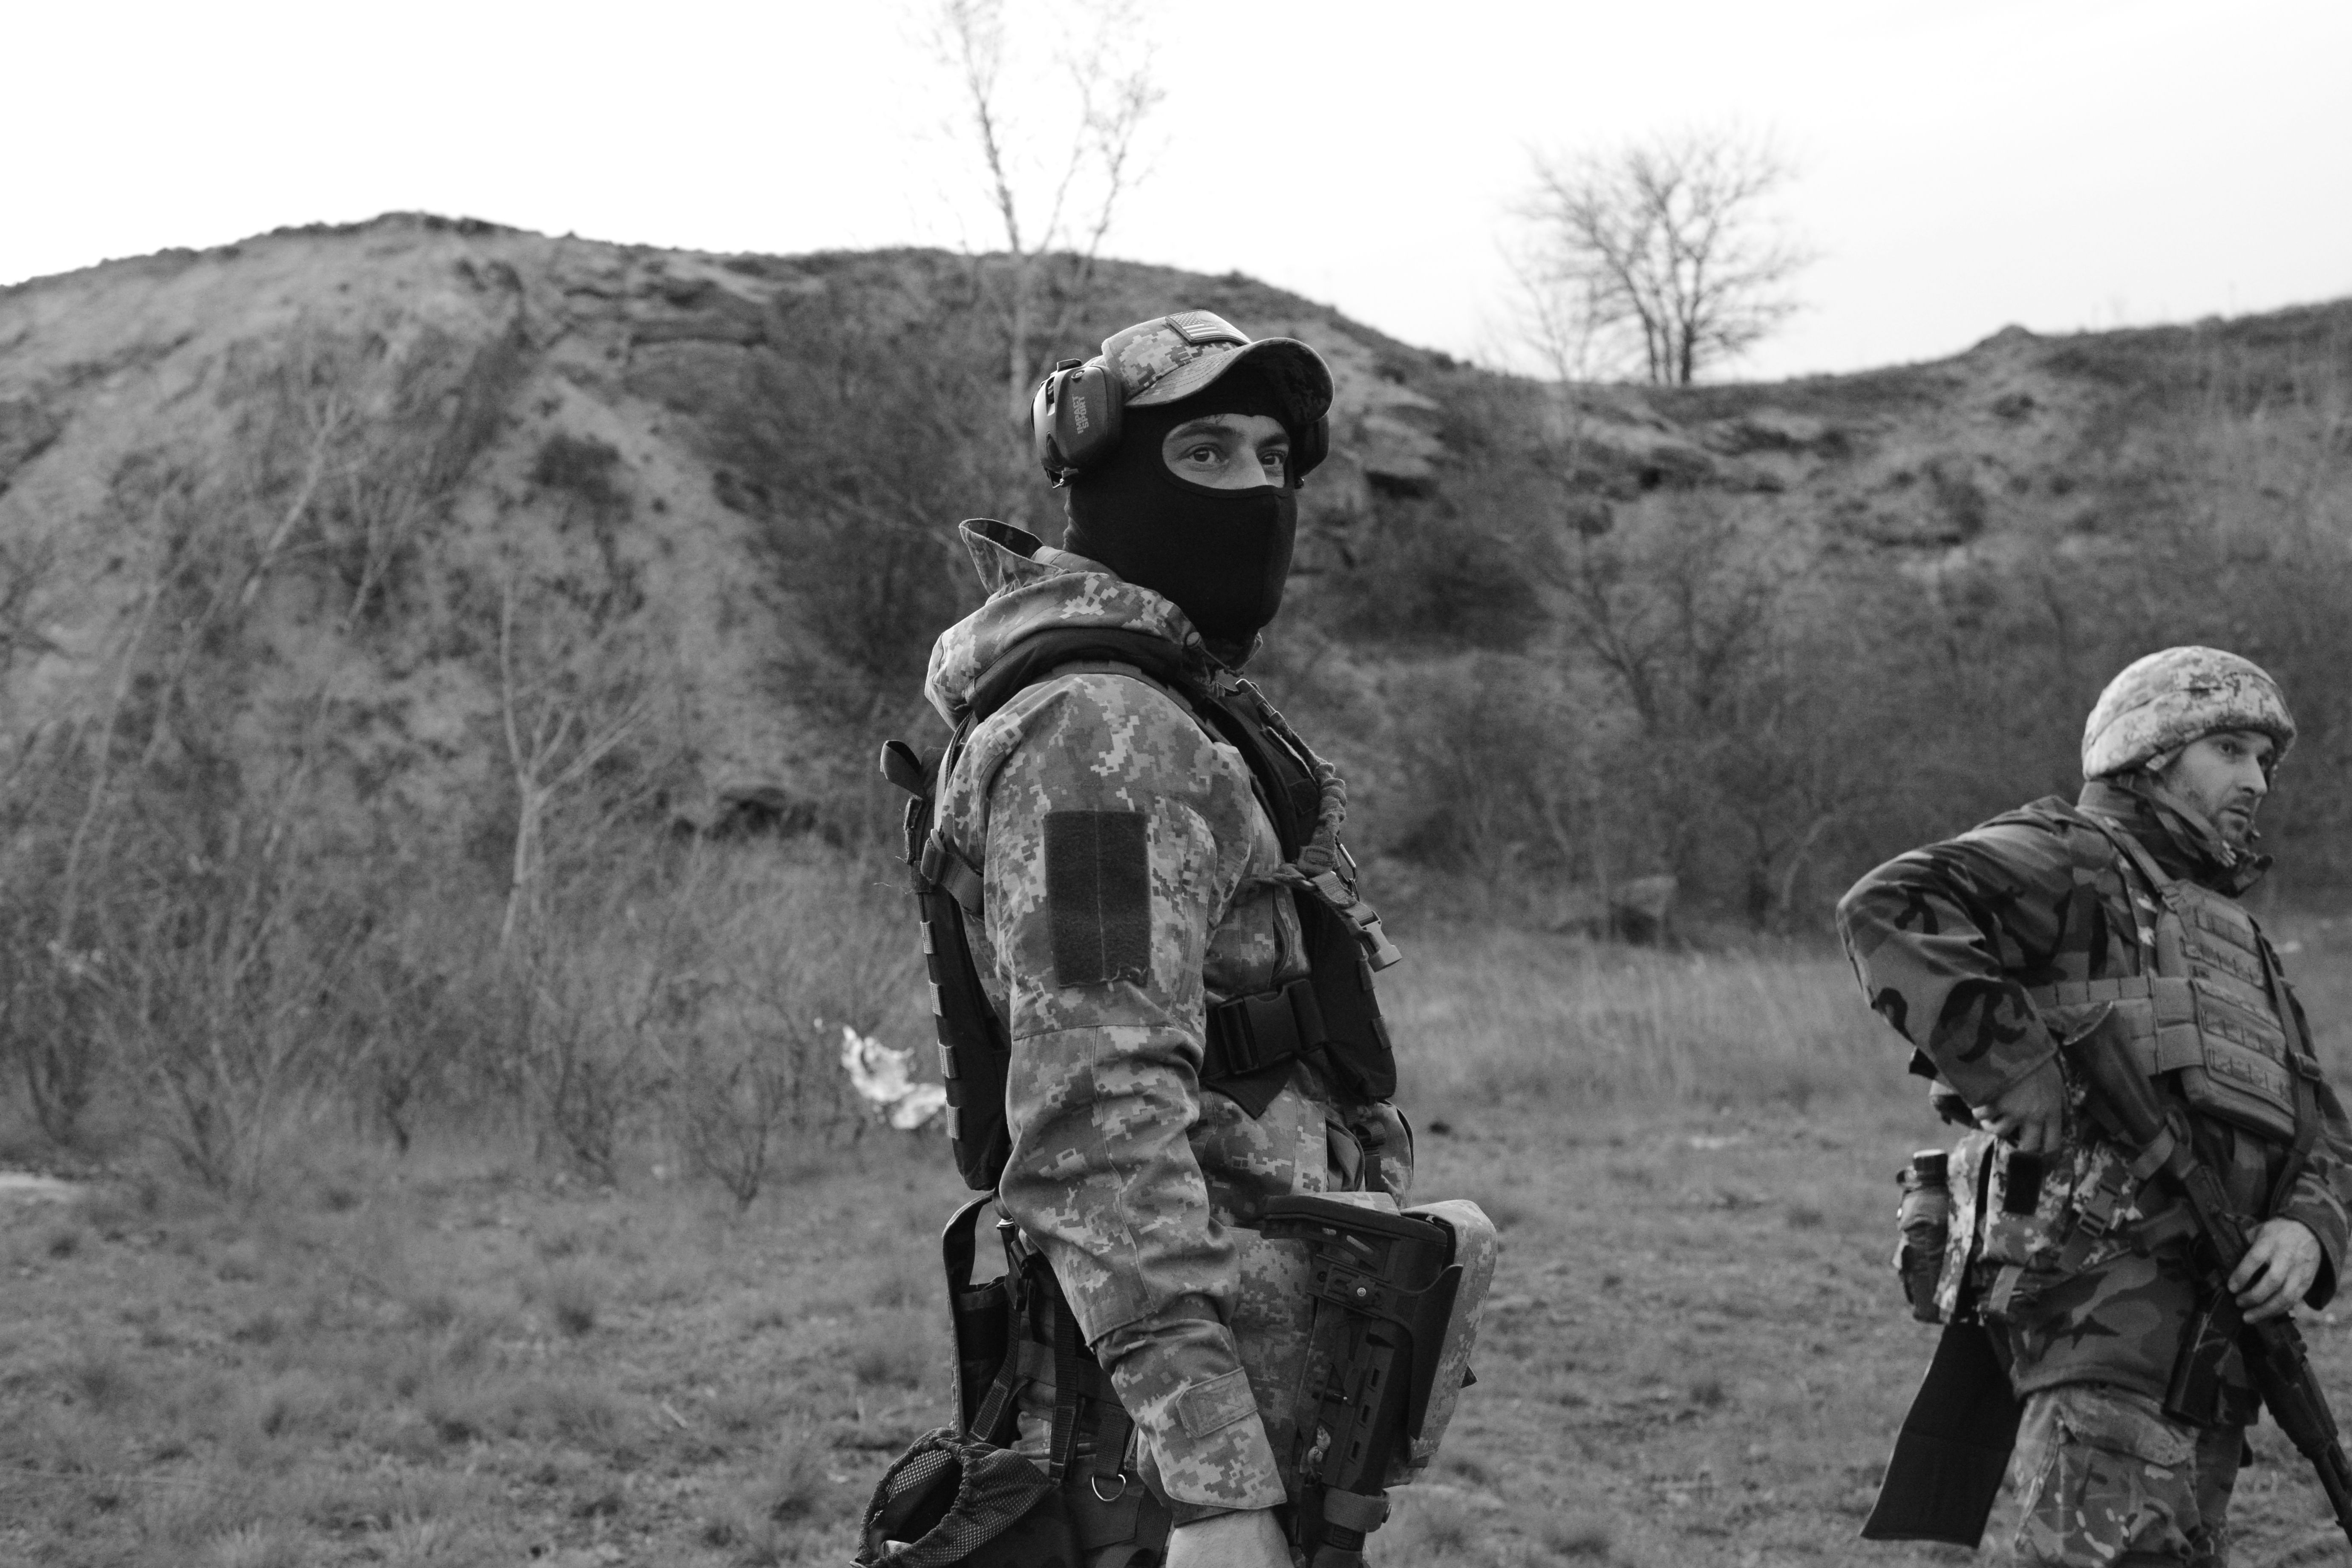 UAF soldiers carry out training ahead of operations